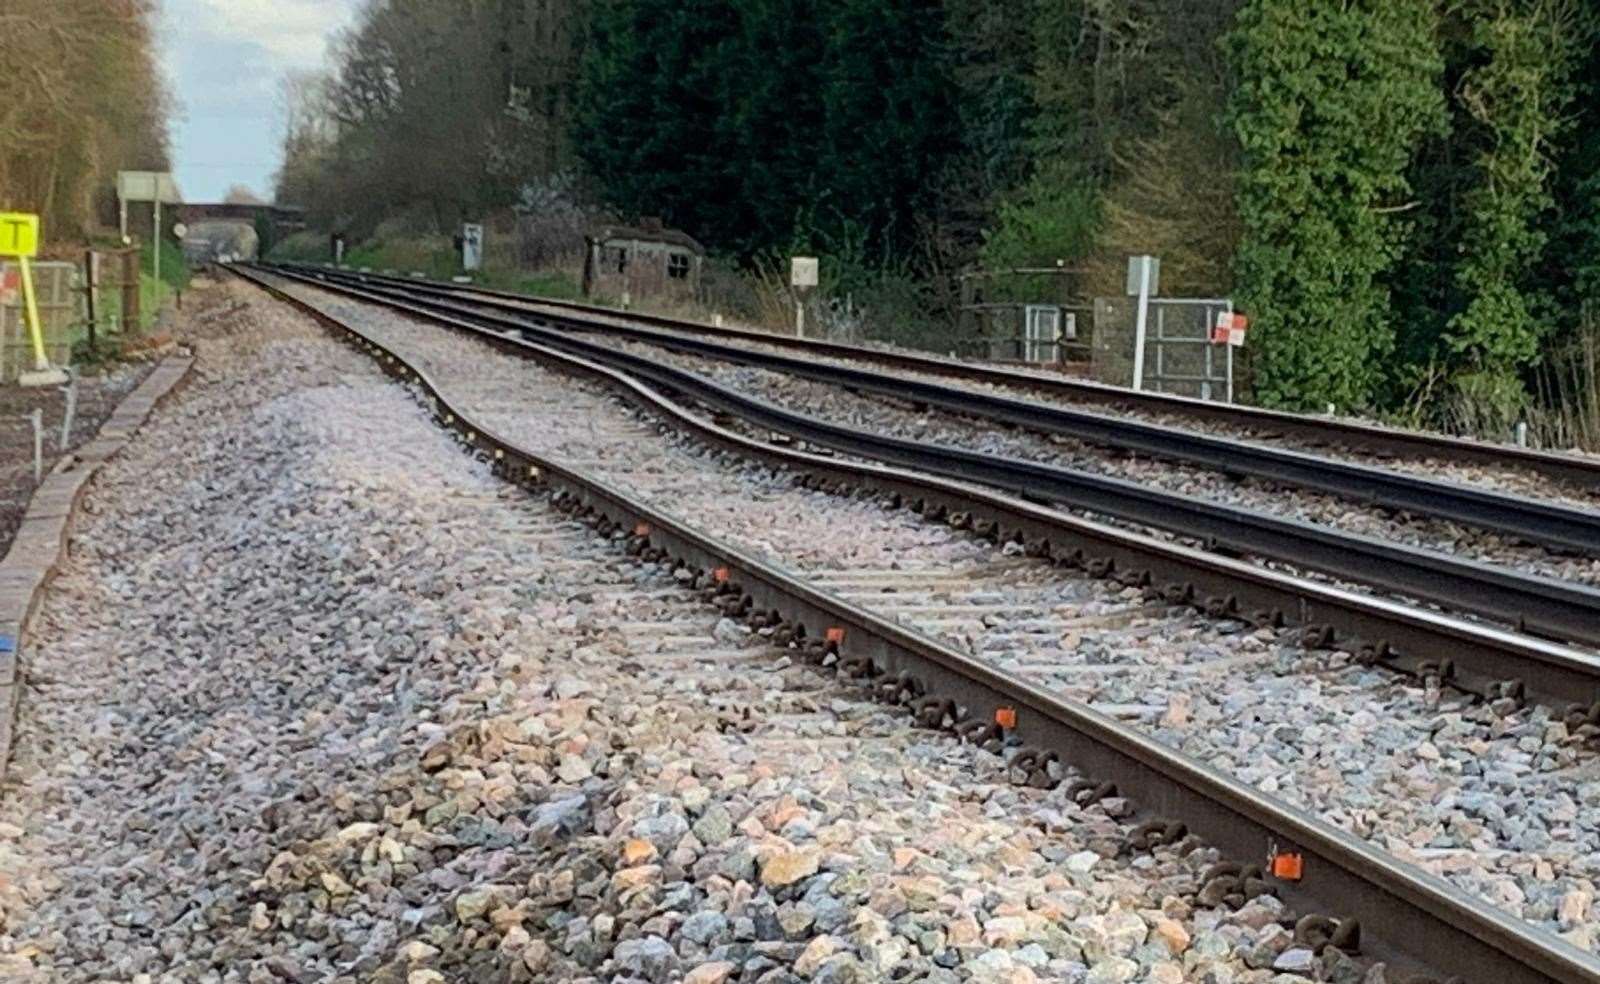 The route is set to remain shut until at least Tuesday. Picture: @NetworkRailSE